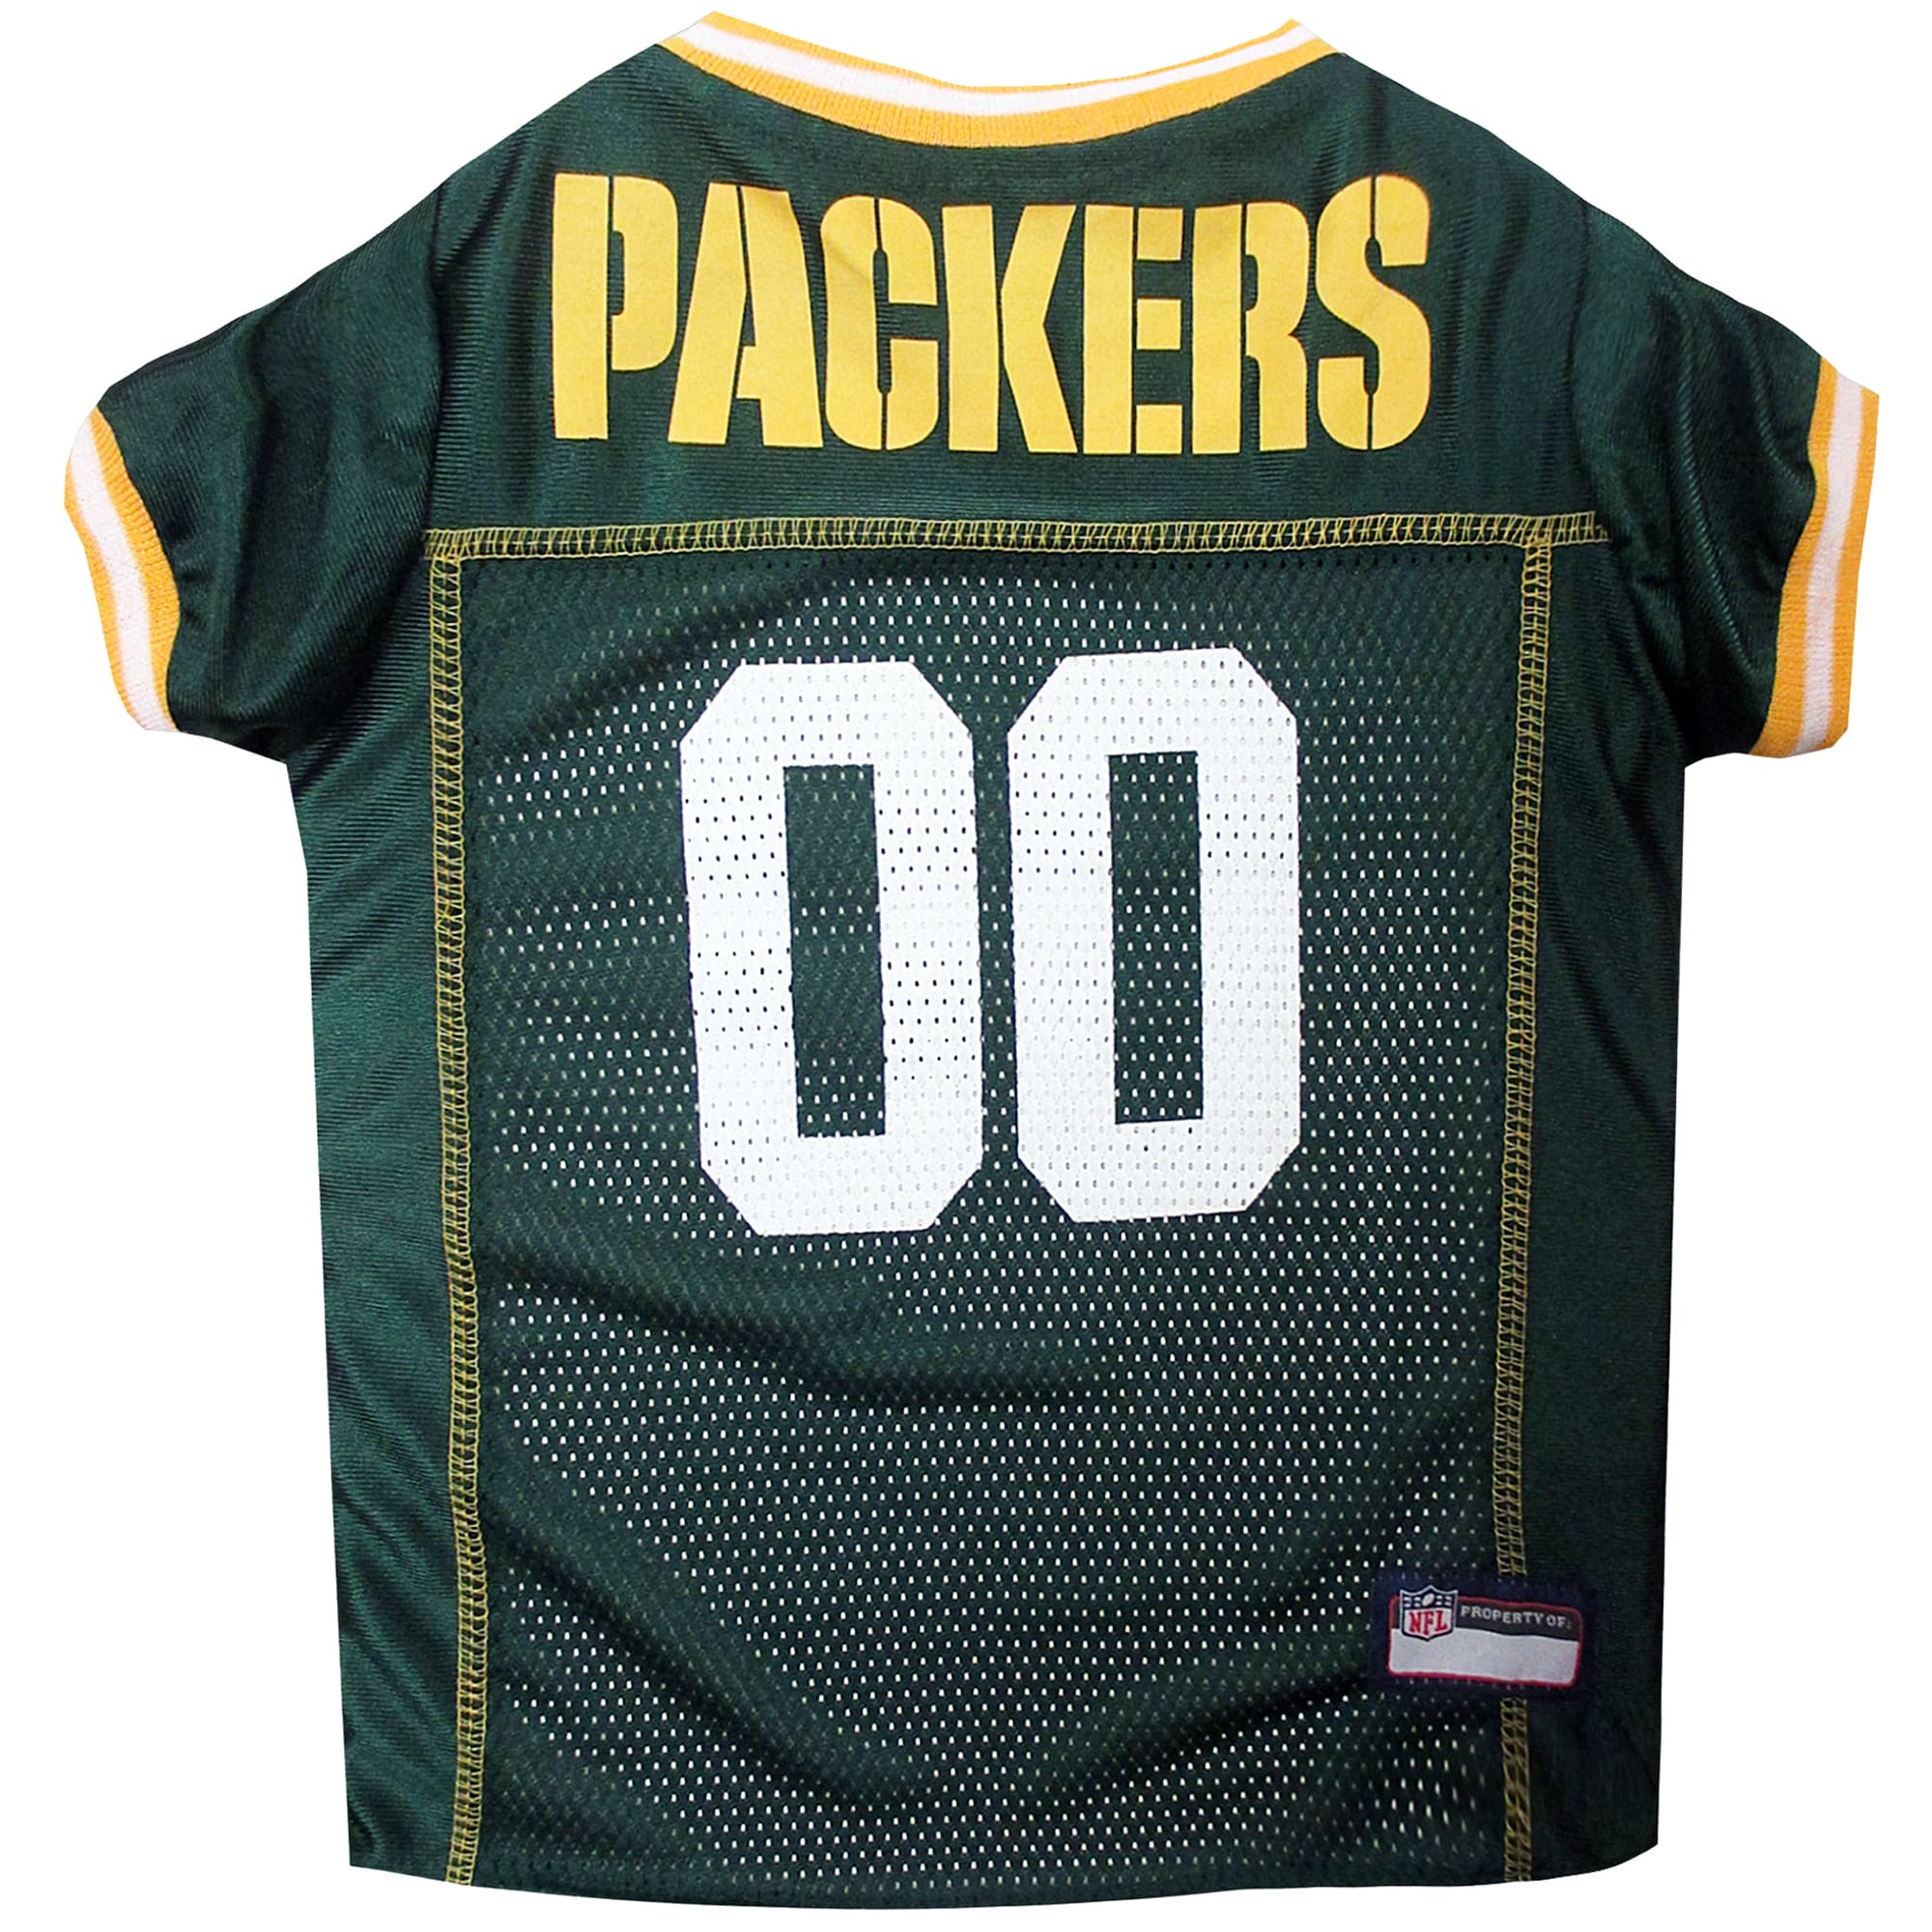 dog green bay packers jersey